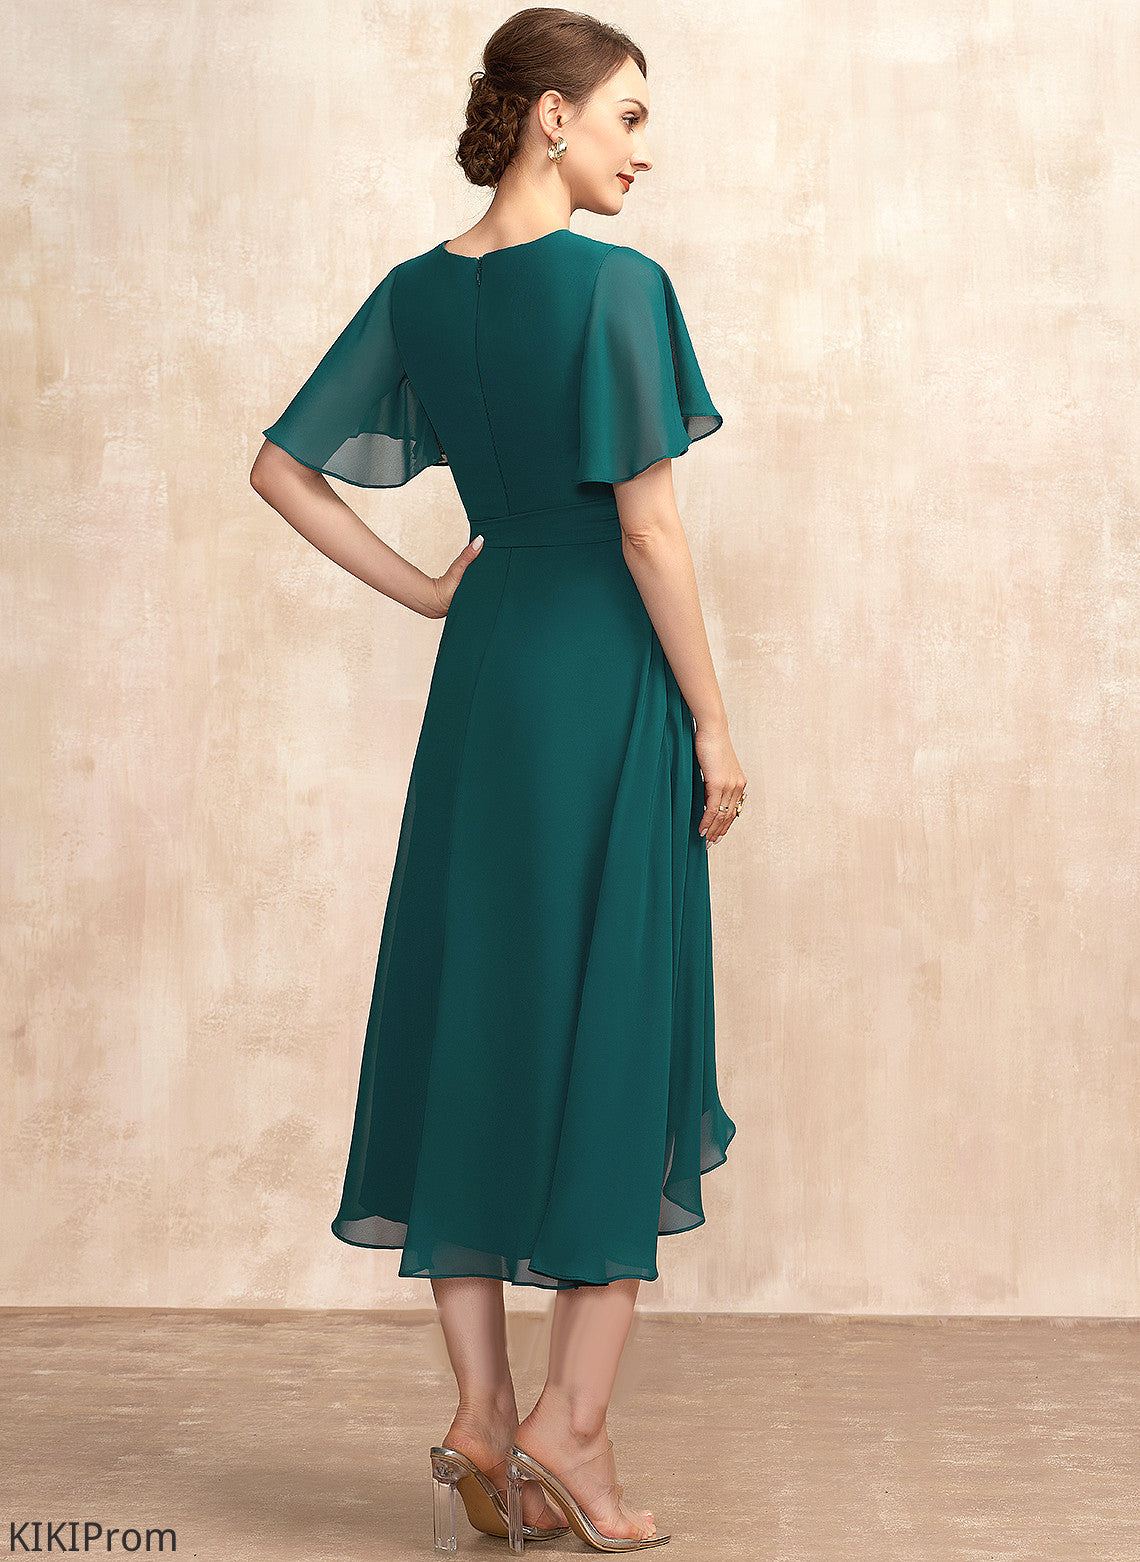 A-Line Chiffon Cocktail Dresses Neck Bow(s) Cocktail Dress With Asymmetrical Tiara Scoop Ruffle